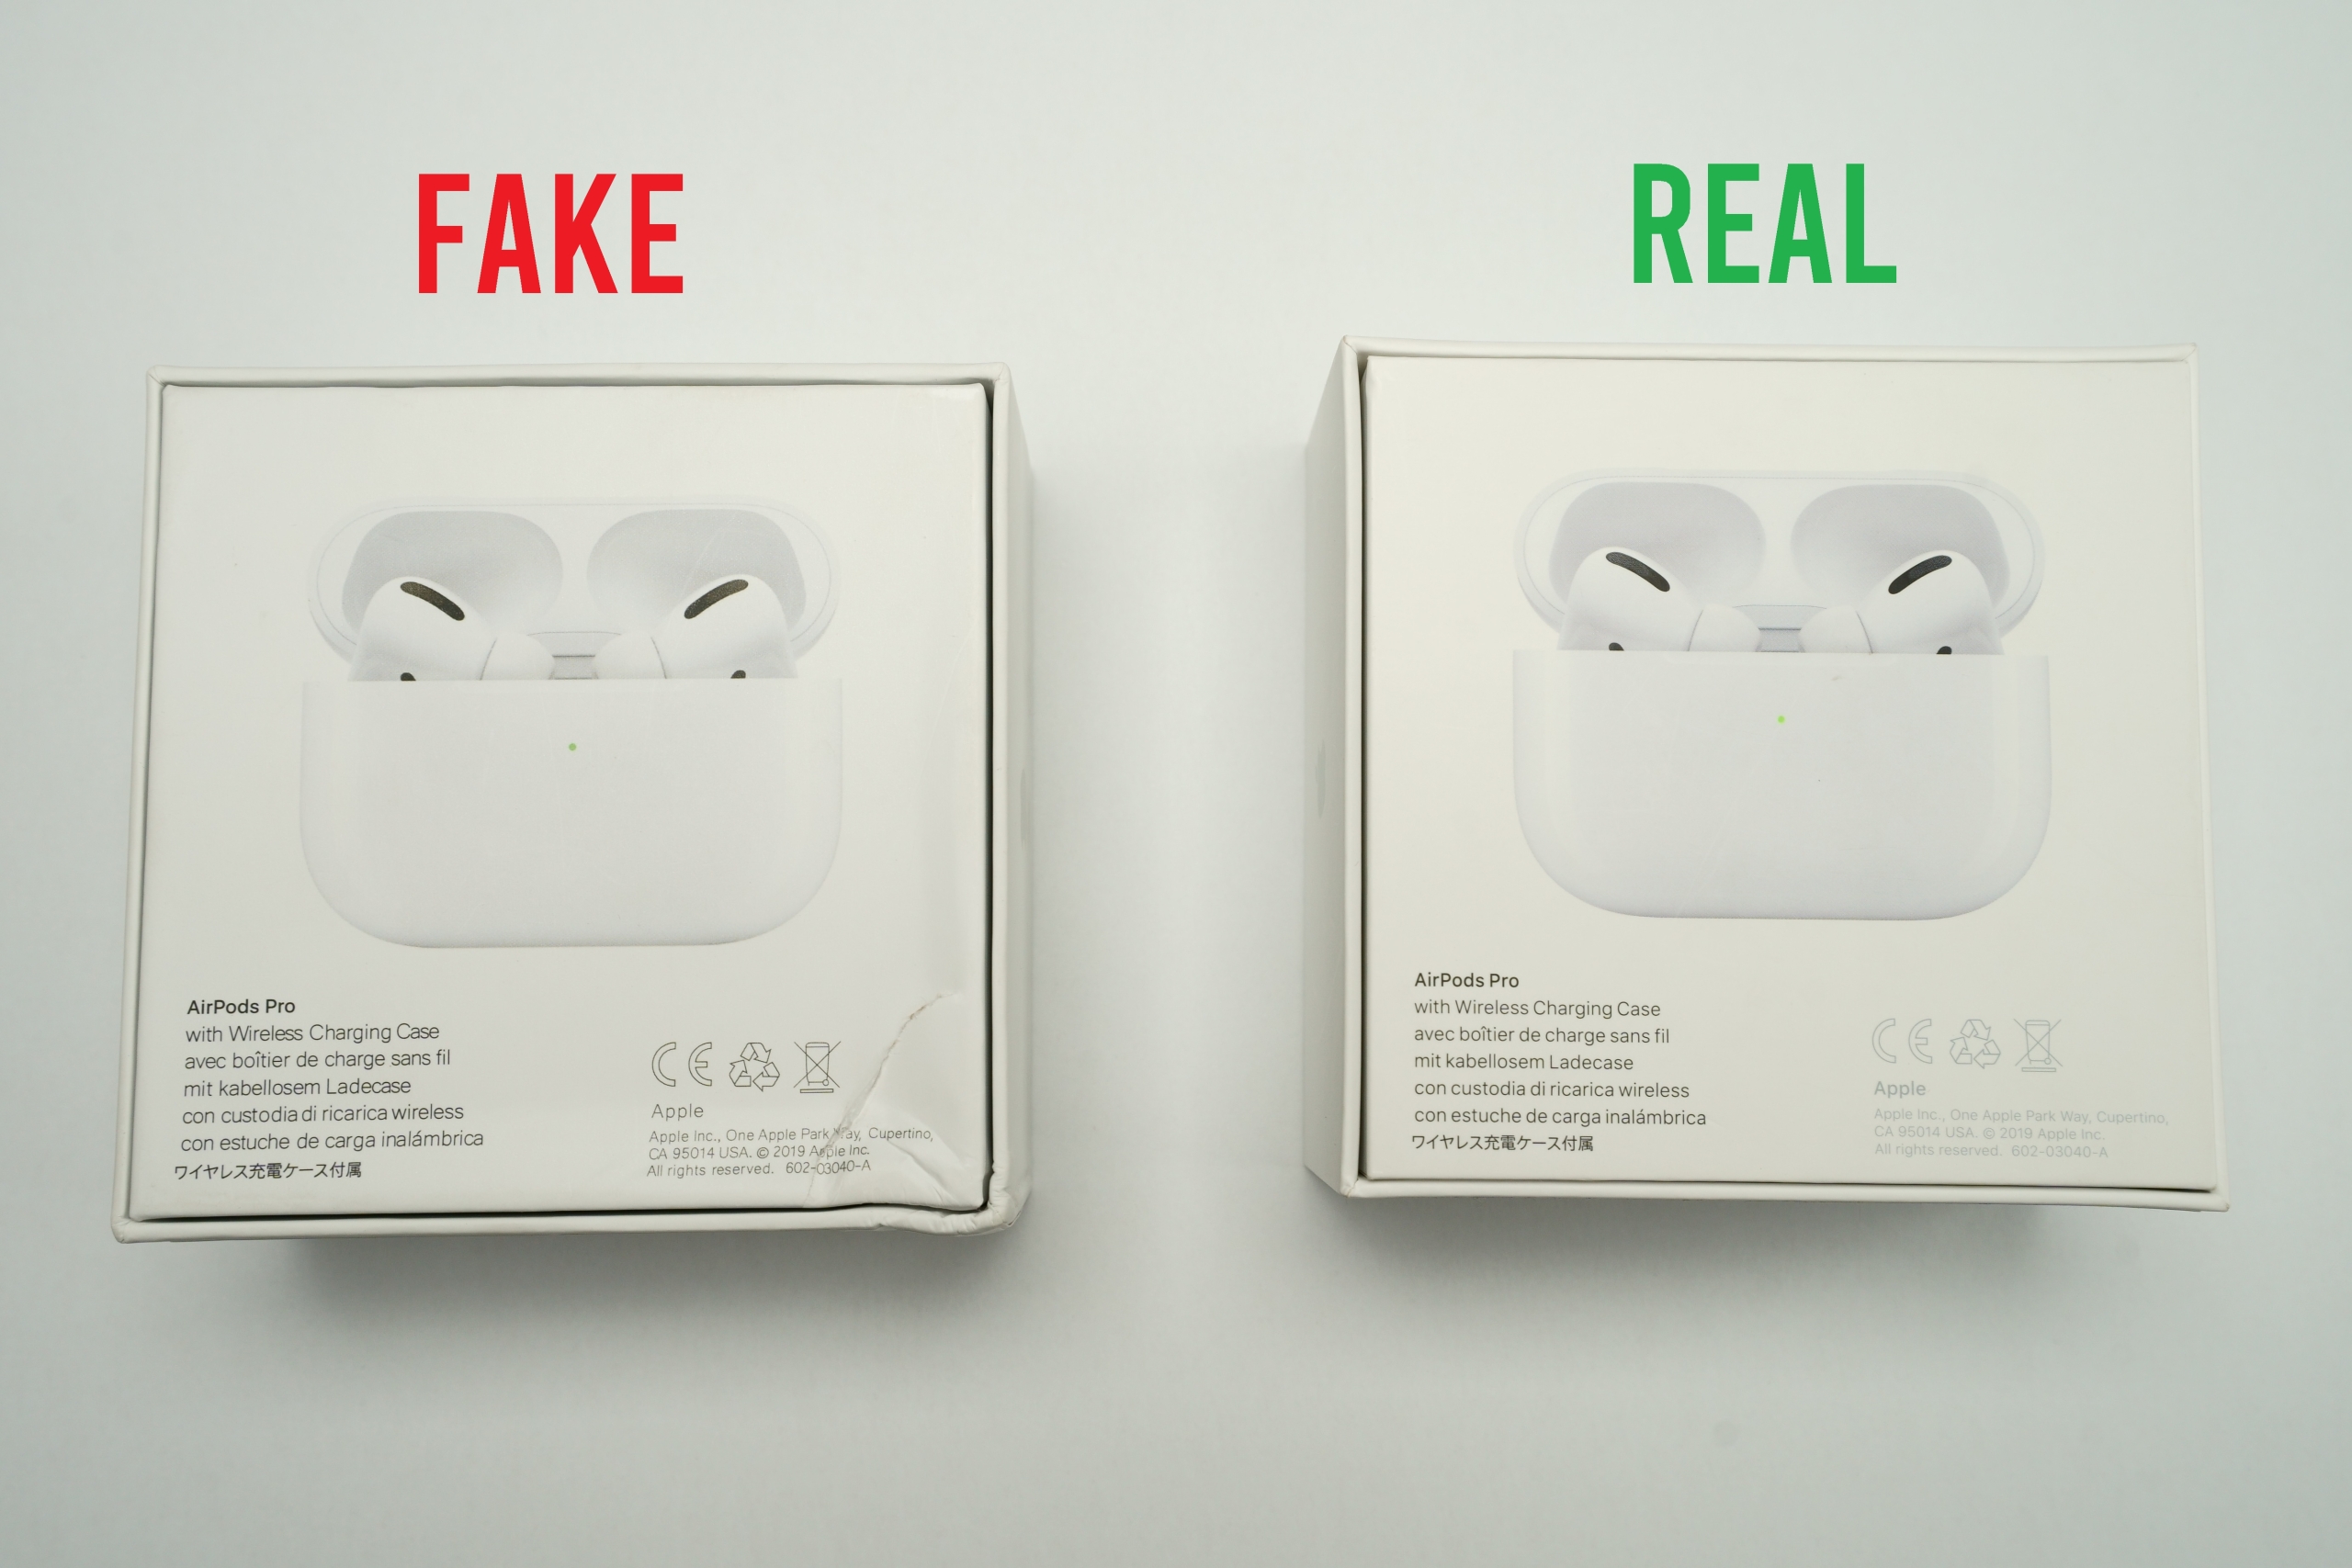 Spotting Counterfeit Airpods Pro - Real vs Fake Comparison ...